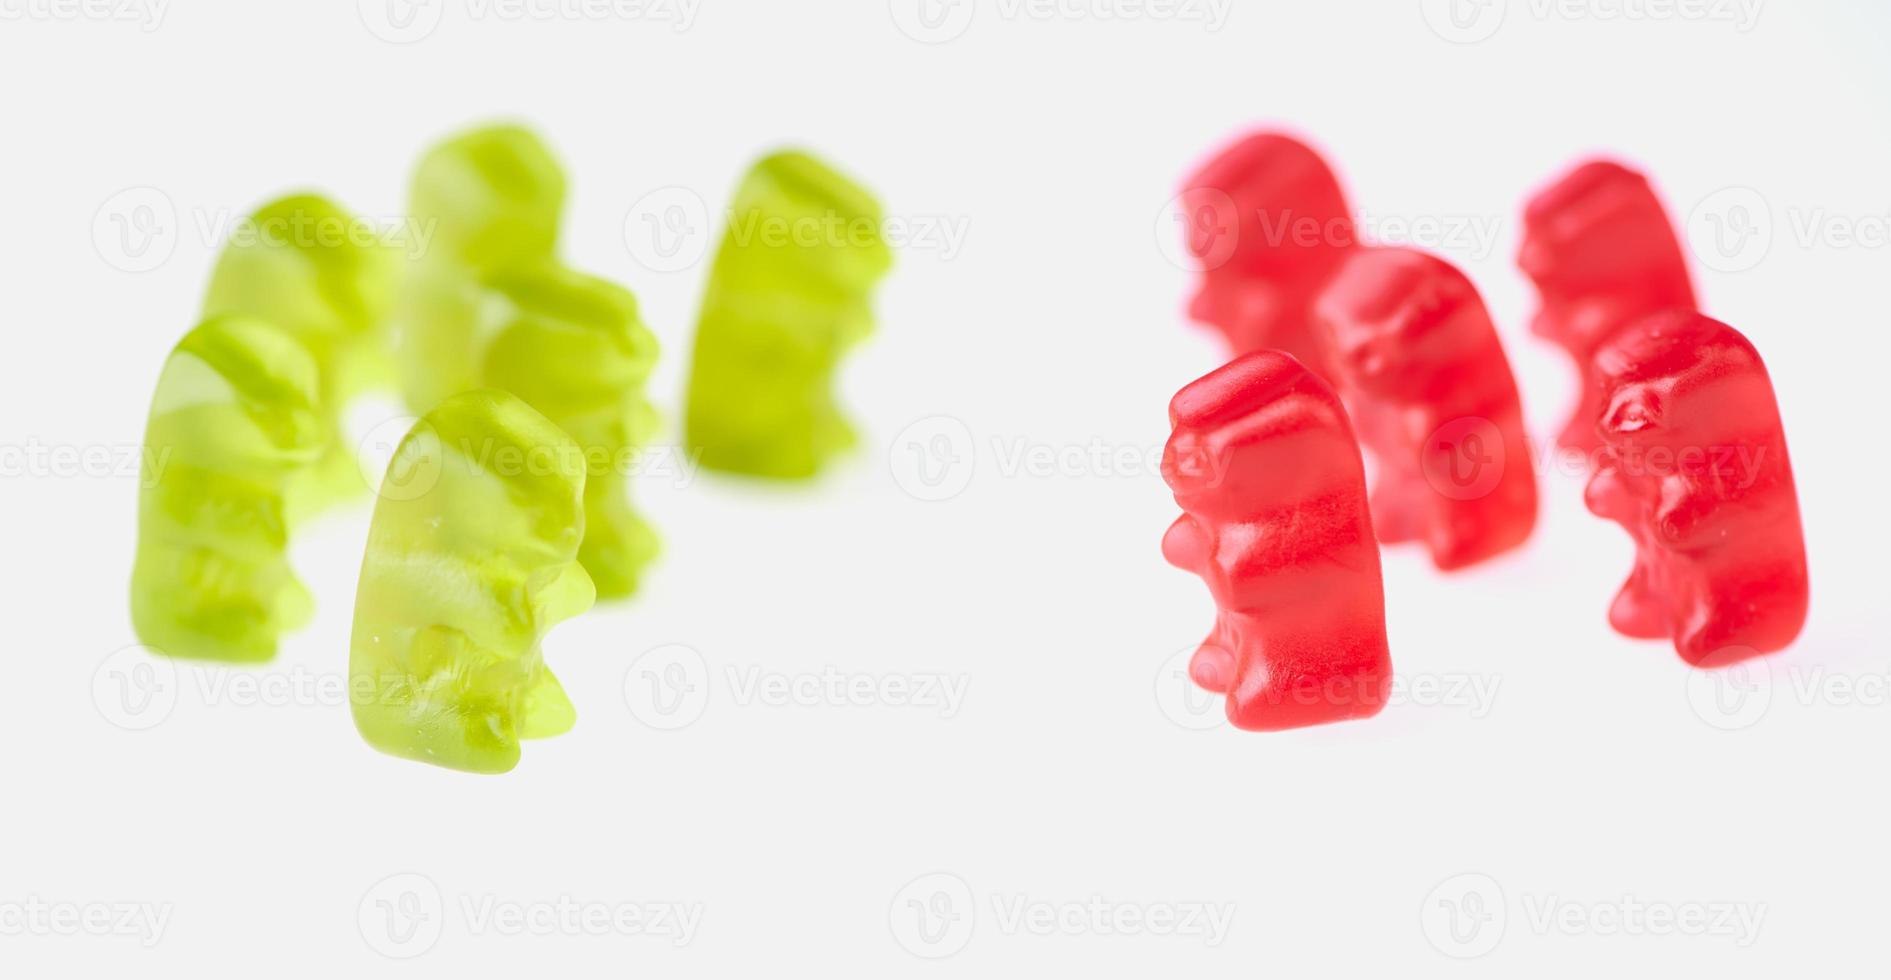 green gummy bears on the left and red gummy bears on the right side on white background photo